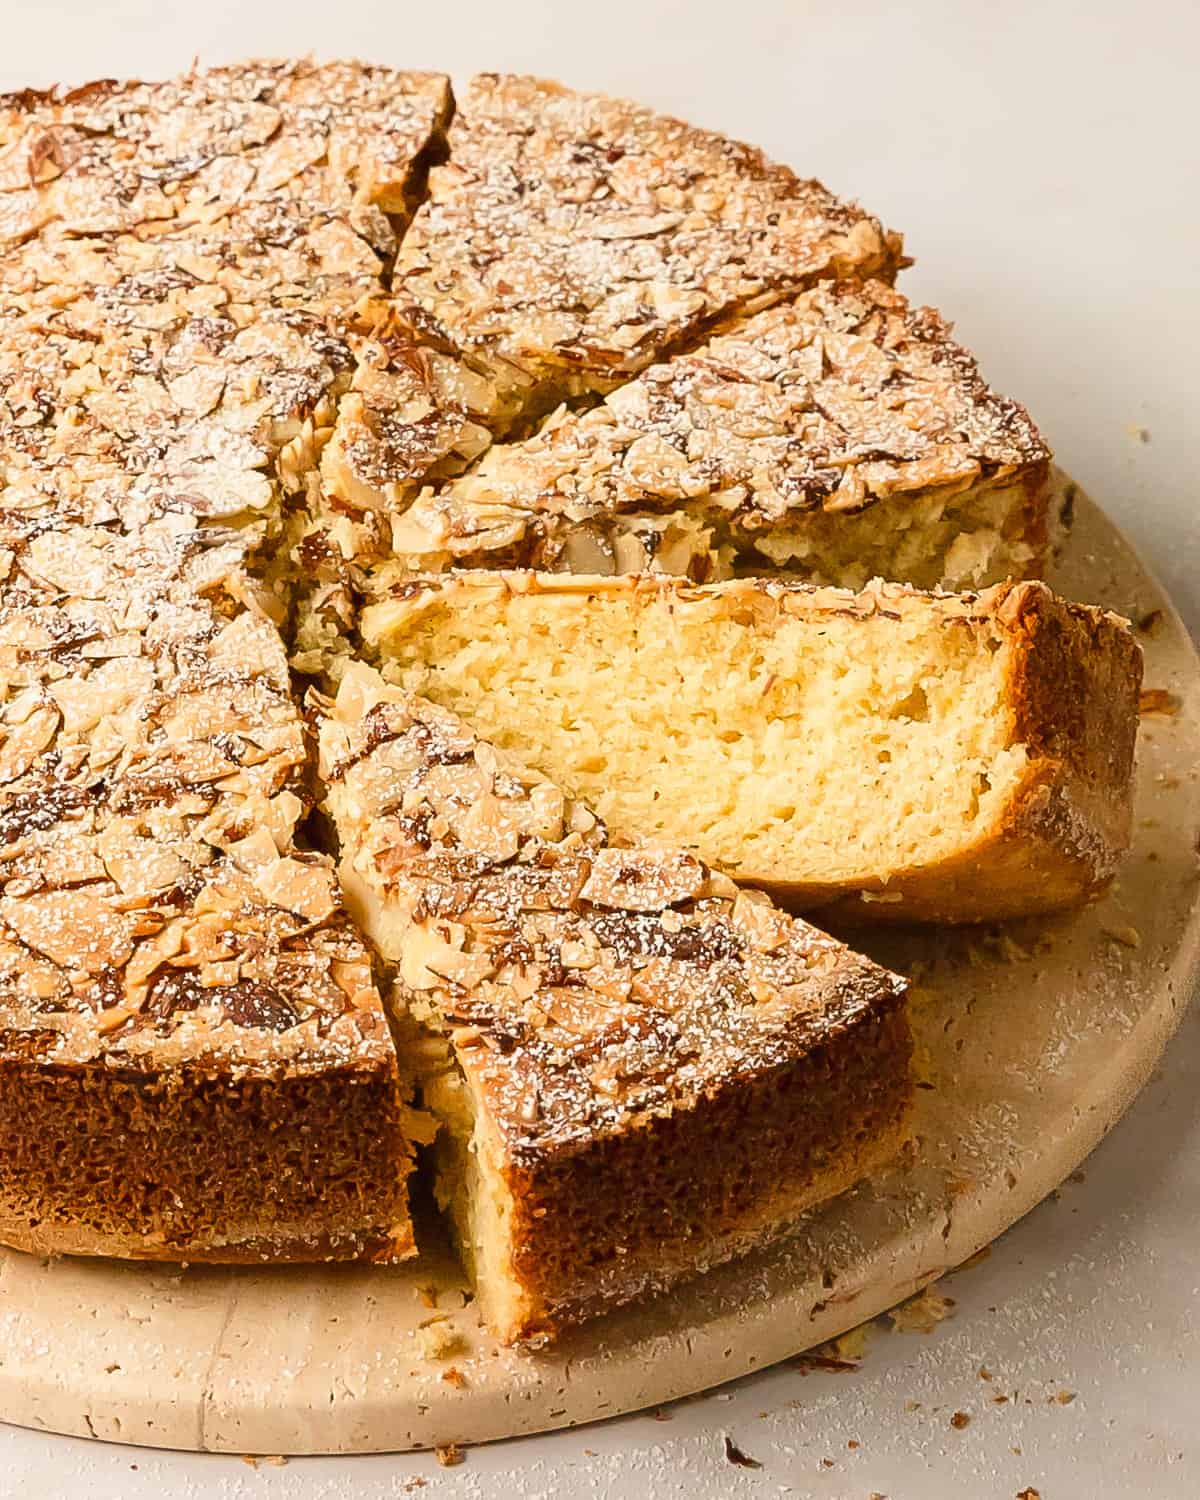 Cardamom cake is a traditional Swedish cardamom cake. This simple cardamom dessert has a buttery soft crumb and with a crunchy almond topping. Make this wonderfully easy cardamom cake recipe to pair with coffee or tea for your afternoon fika. 